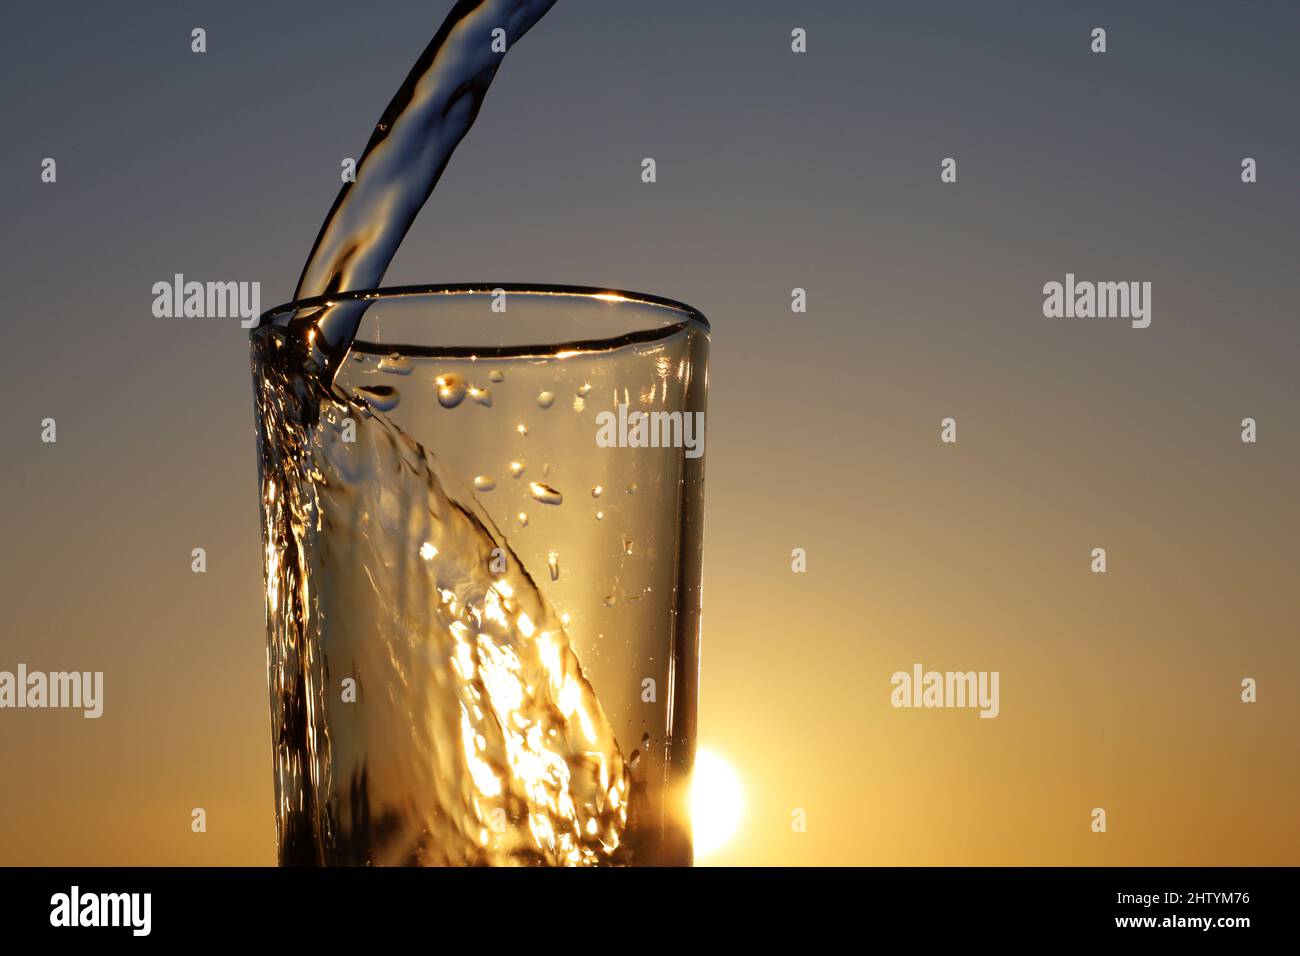 https://c8.alamy.com/comp/2HTYM76/clean-water-pouring-into-drinking-glass-on-sunset-sky-background-concept-of-health-and-freshness-thirst-water-purification-2HTYM76.jpg